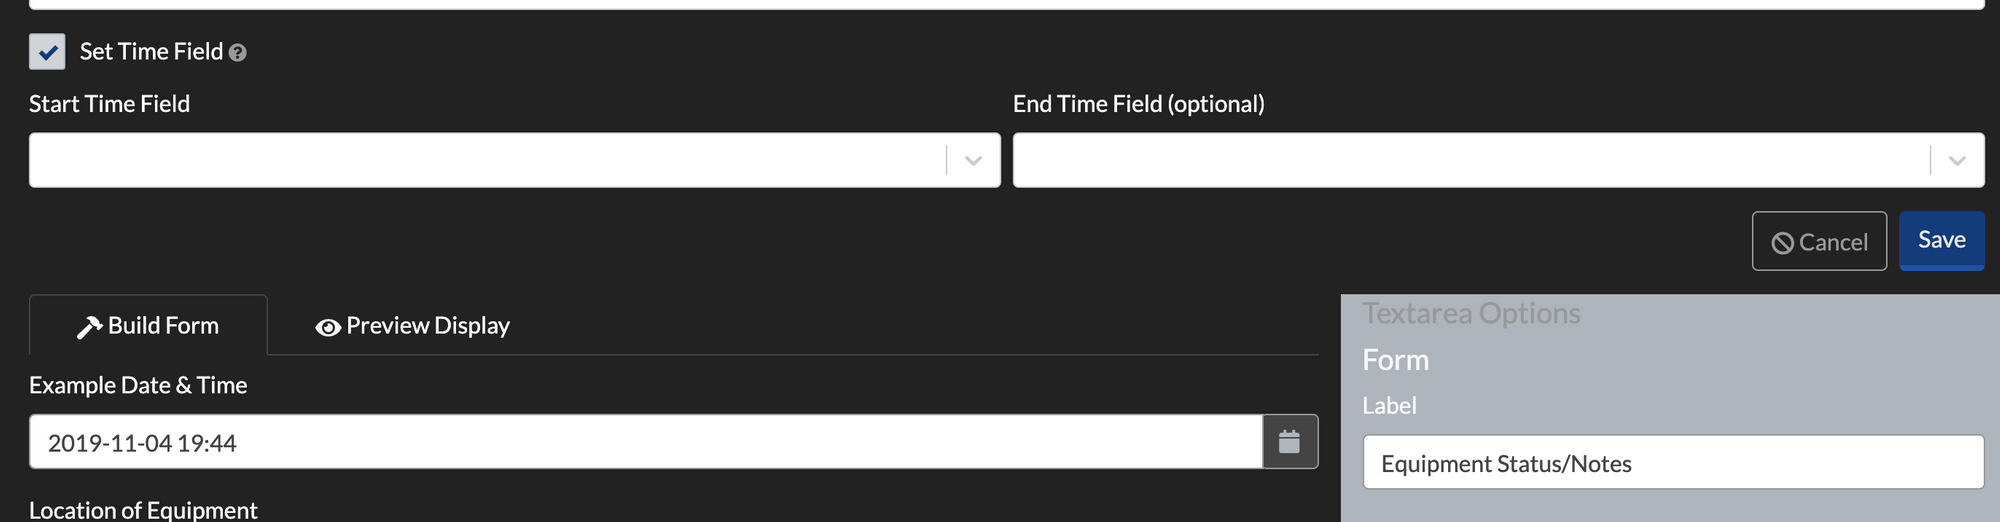 Report Entries Form Builder, Set Time field is checked